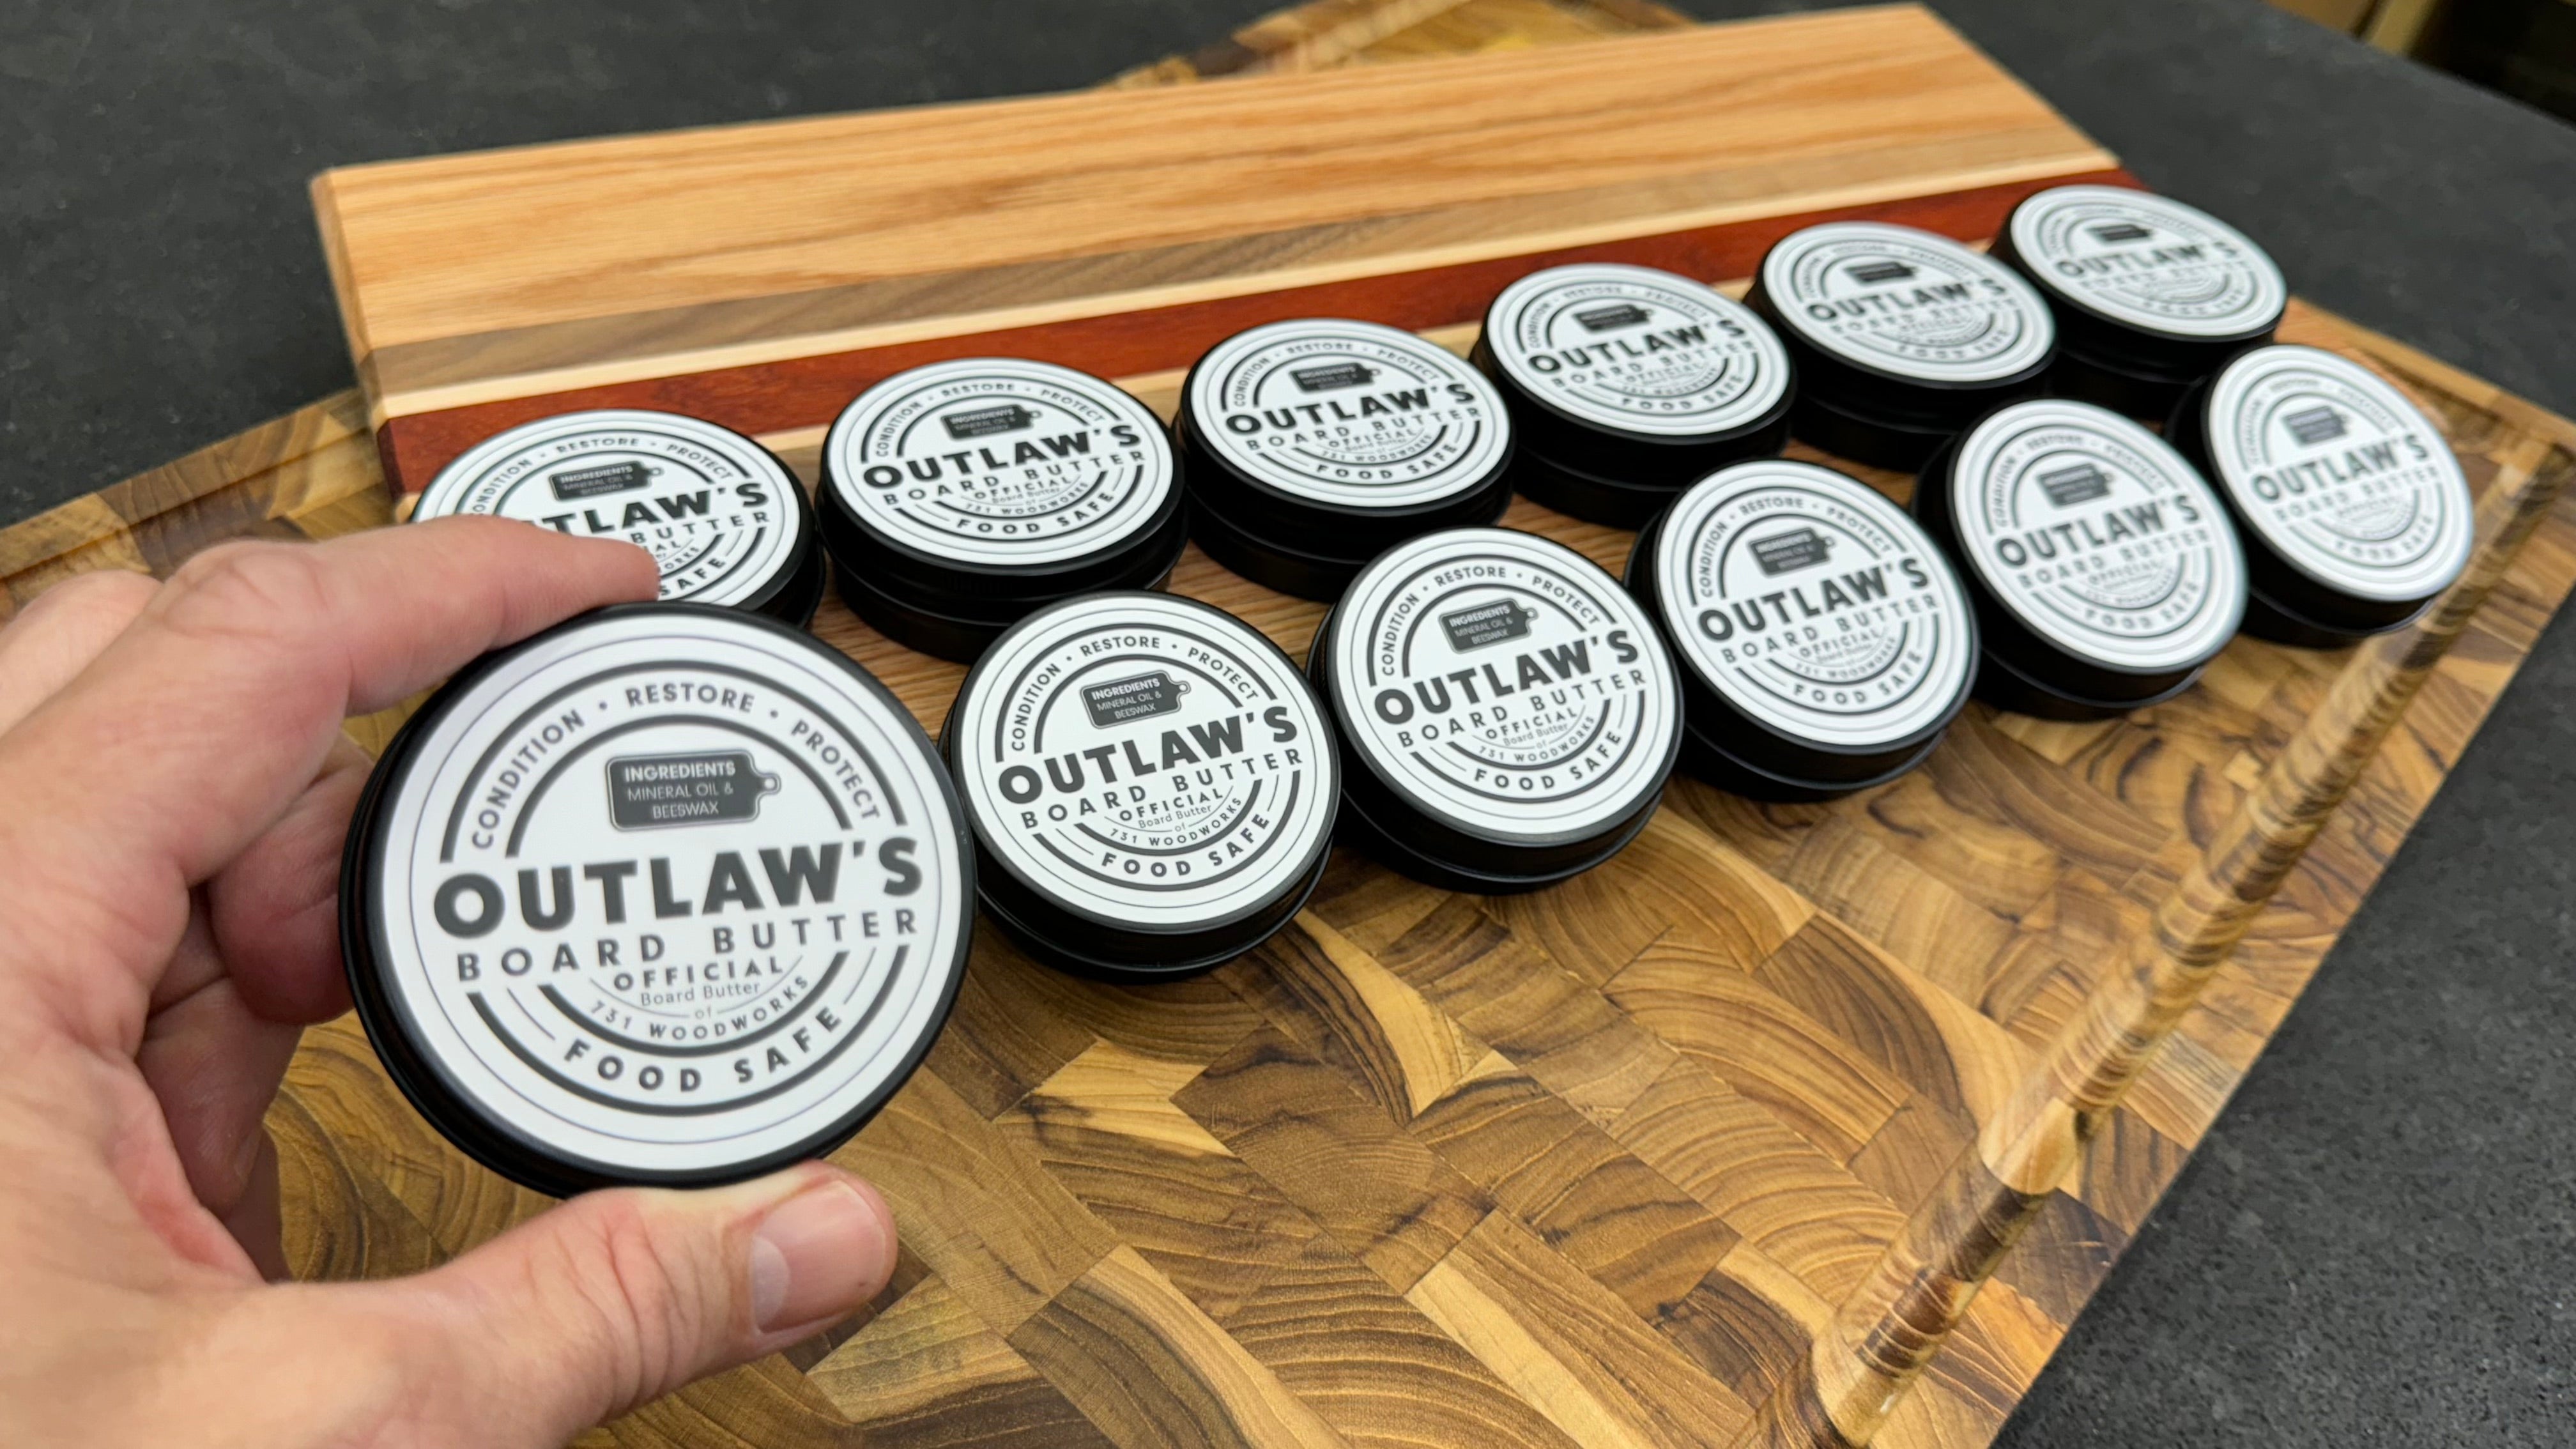 Bandit Multi-Pack Outlaw's Board Butter